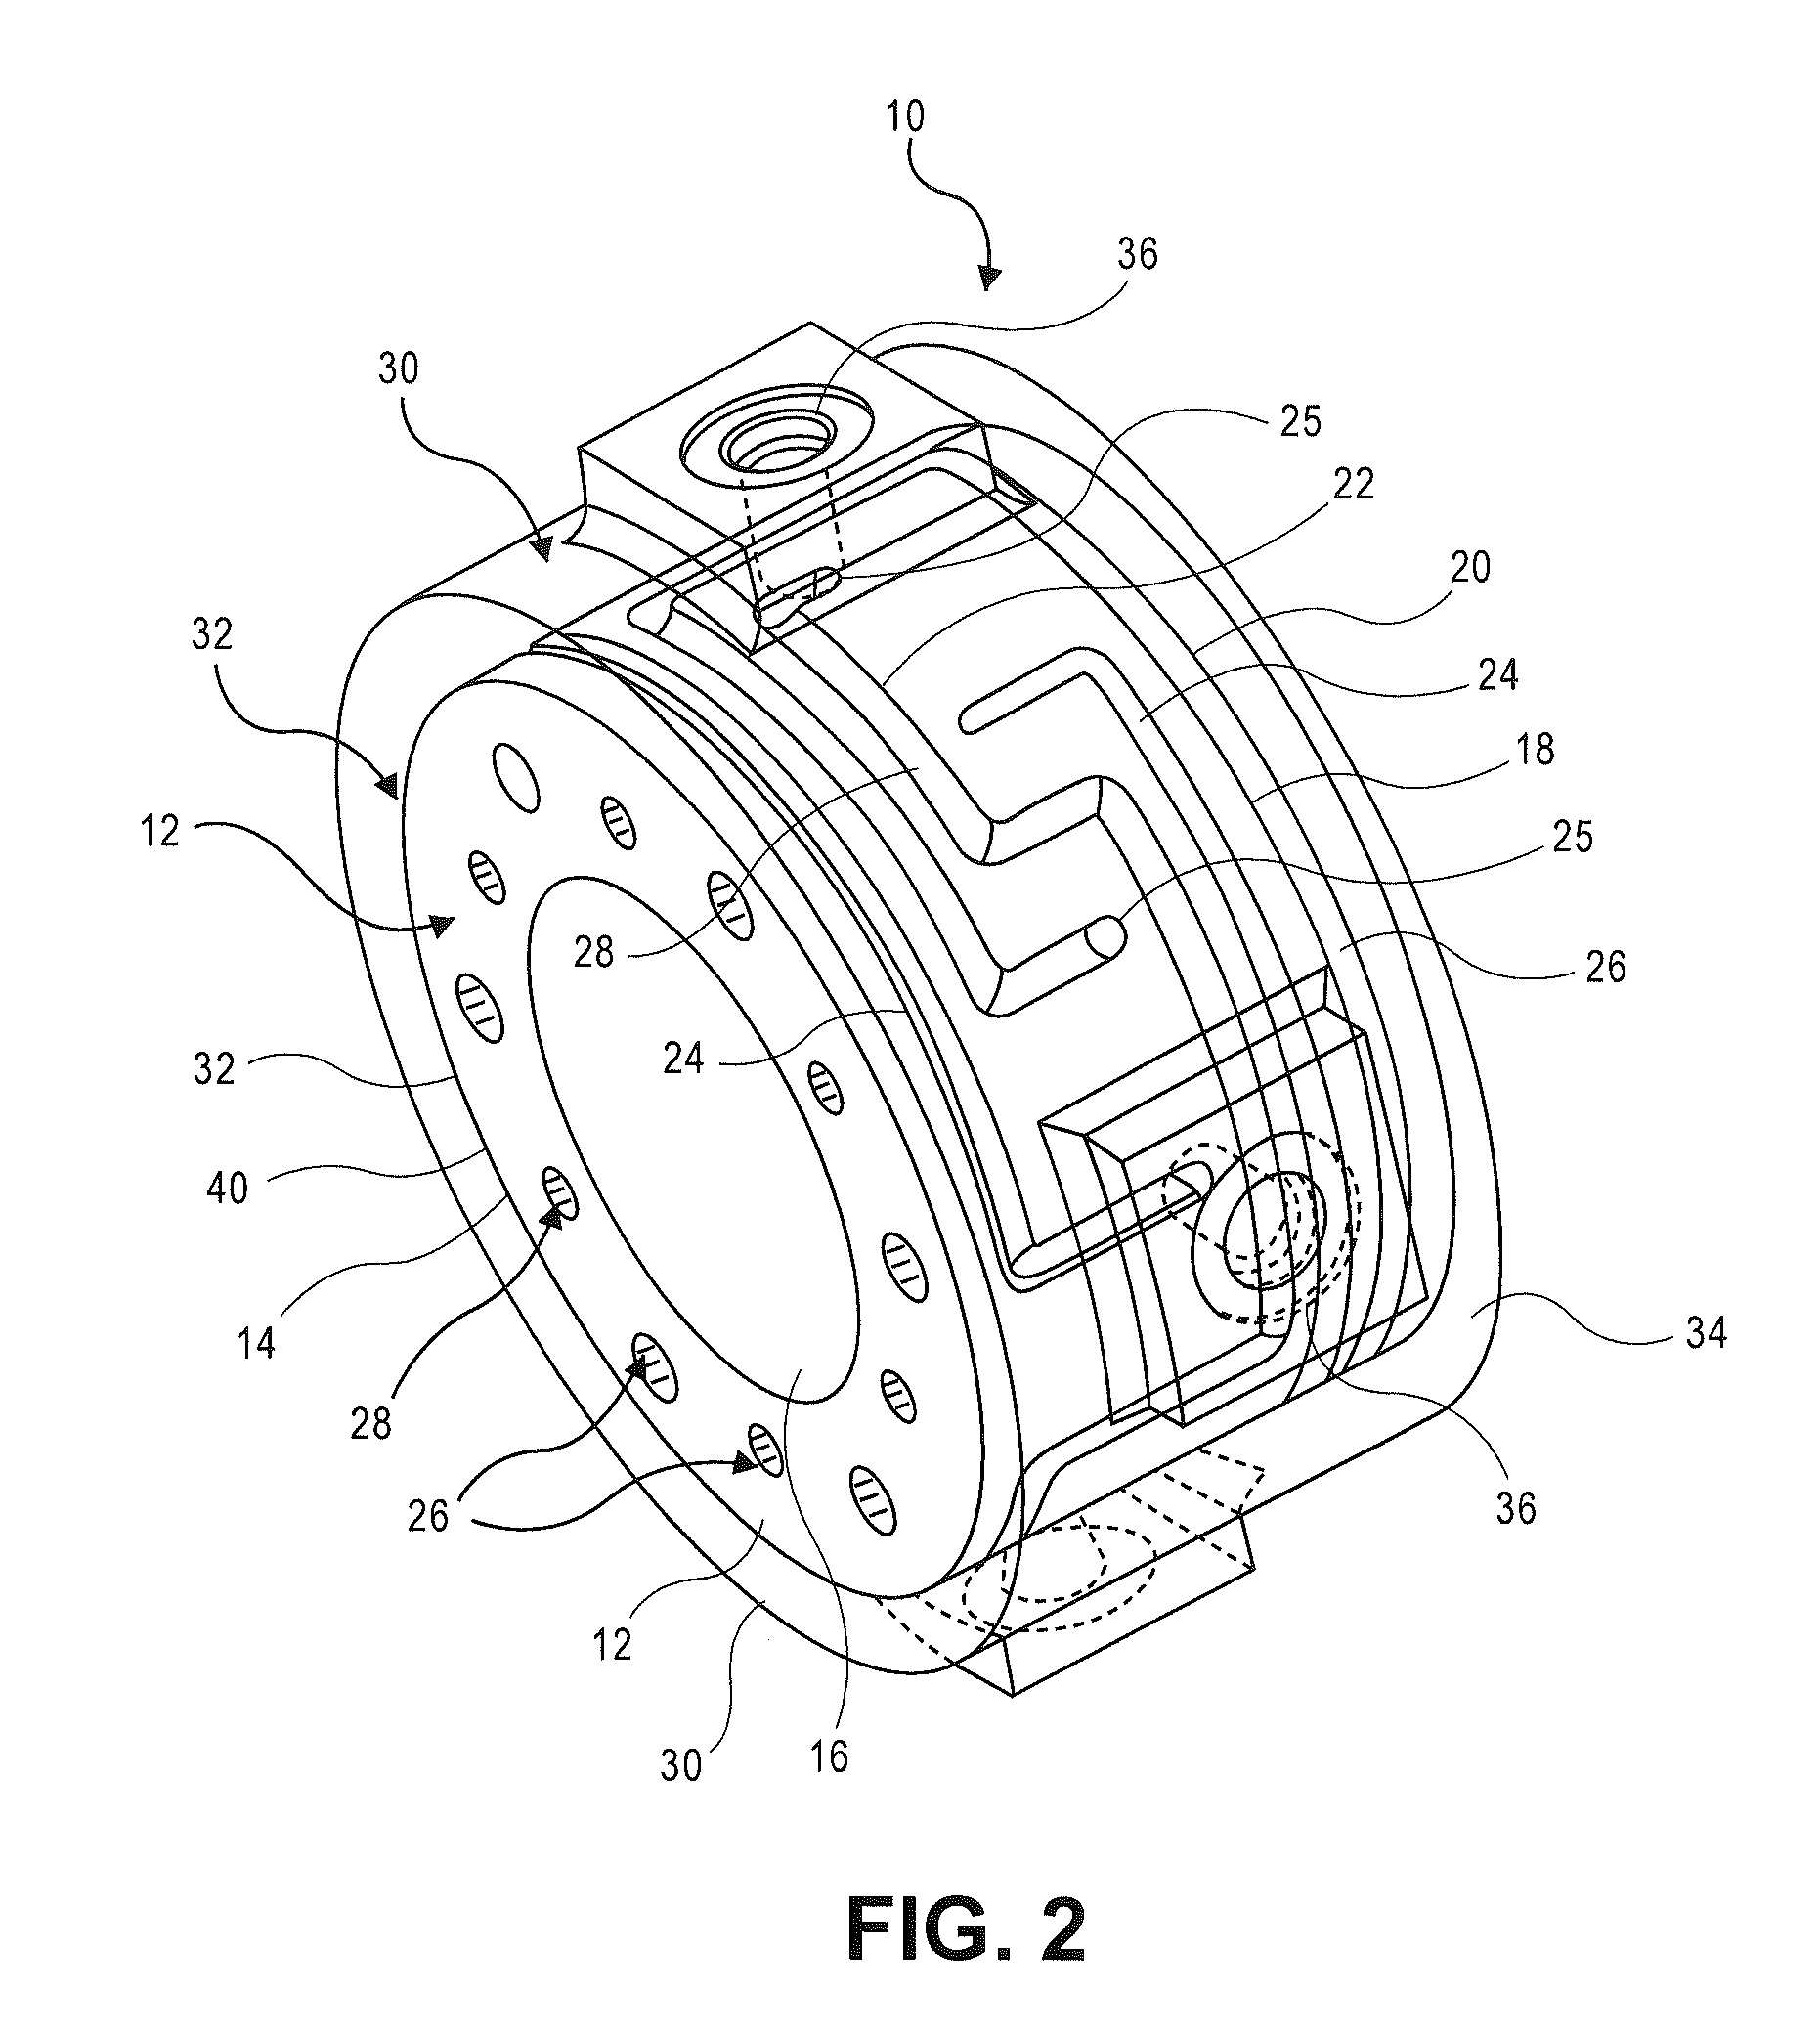 Multi-part, manifold and method of making the manifold